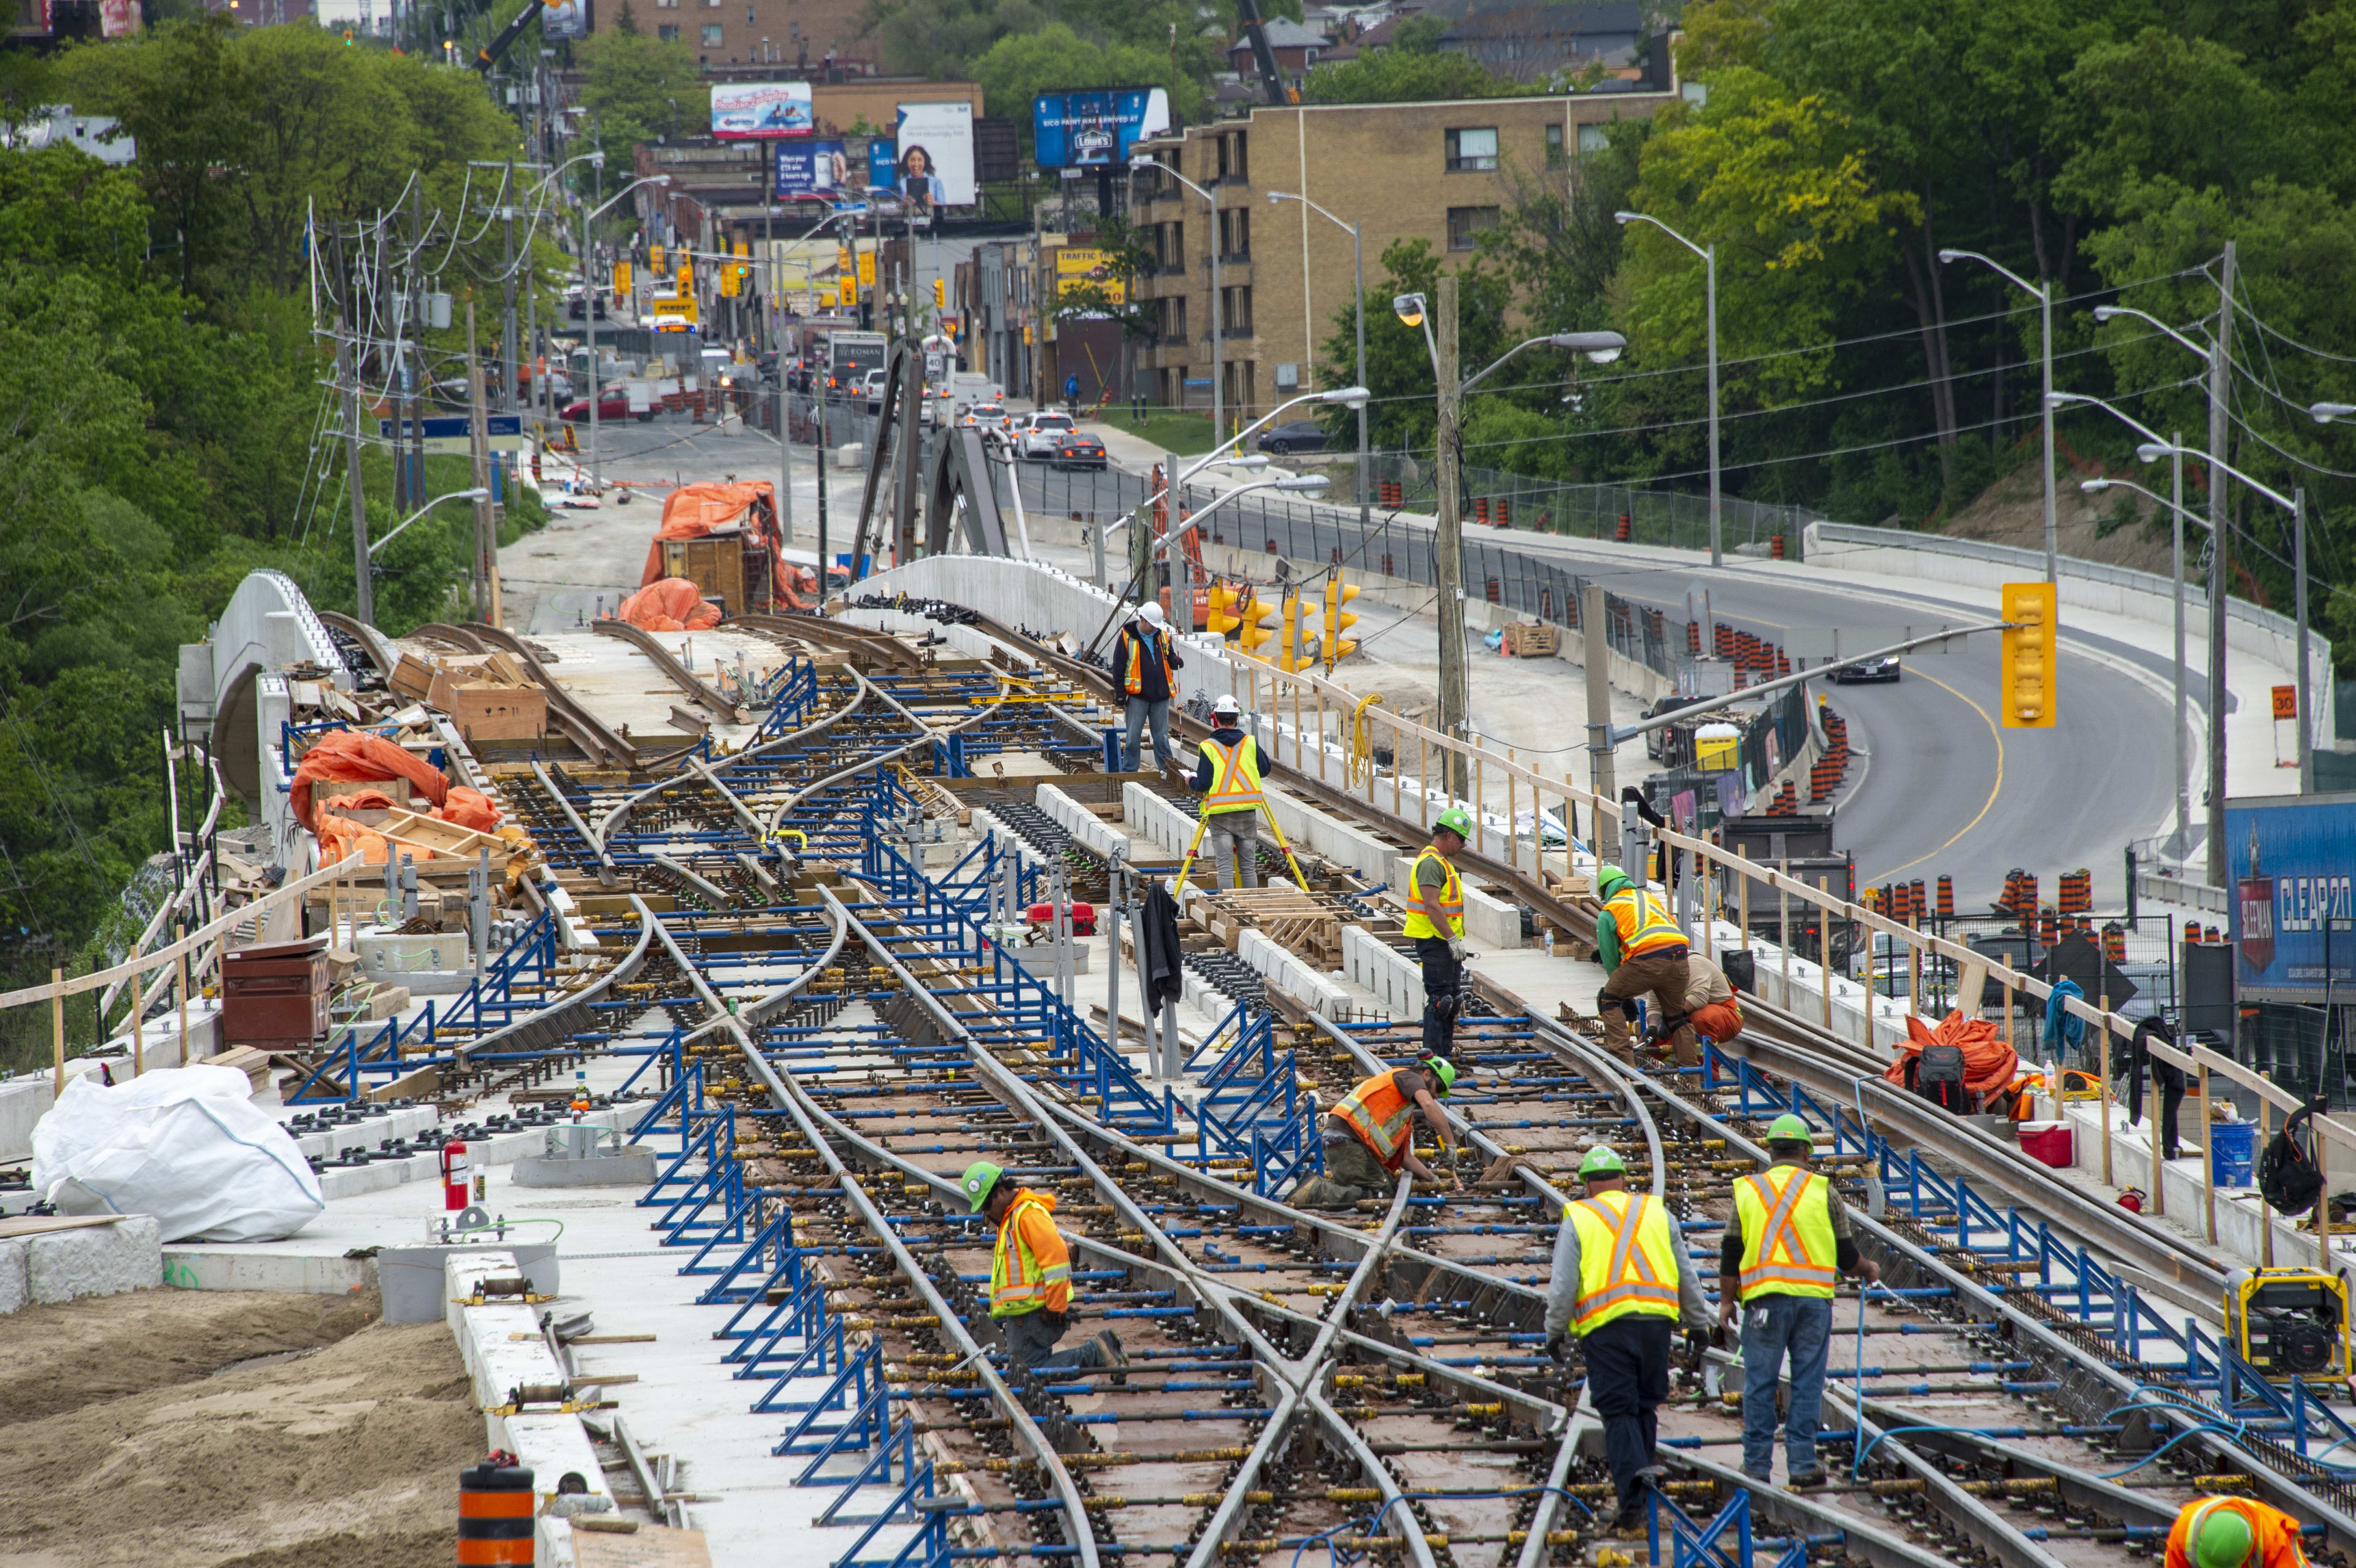 Crews work along tracks that twist and tun in a complicated pettern.